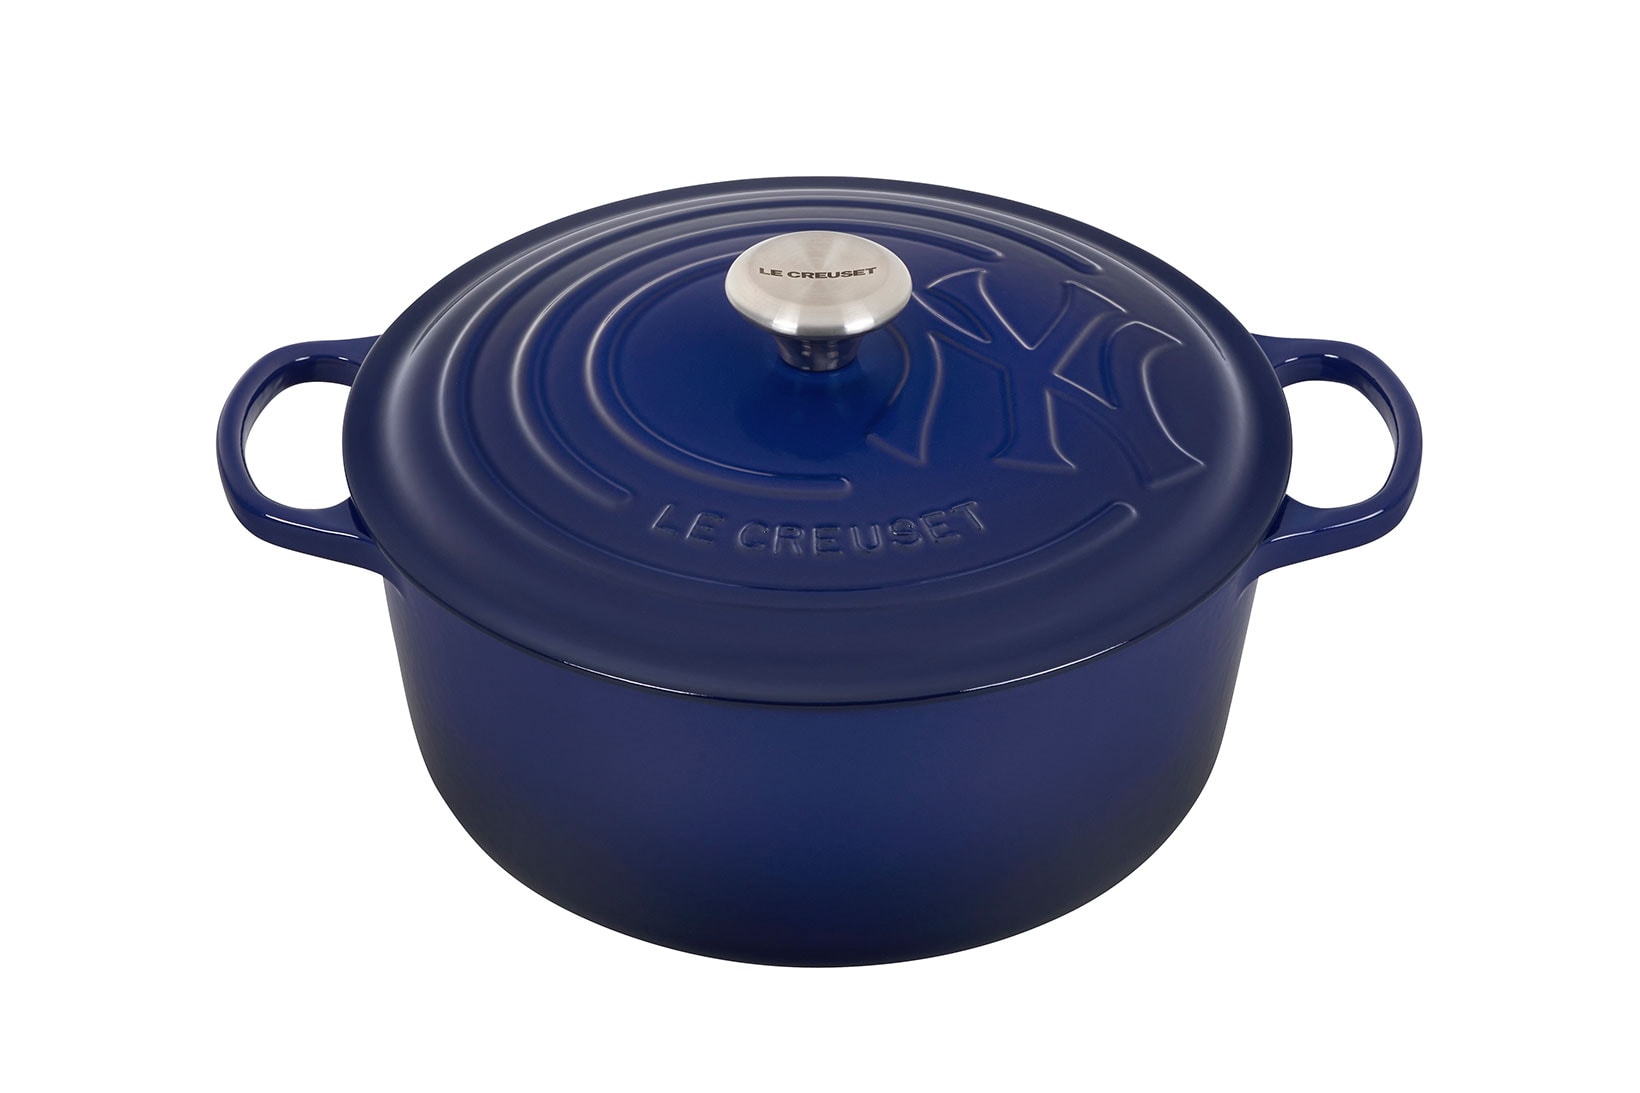 le creuset mlb major league baseball collaboration kitchenware dutch ovens blue white red release price where to buy